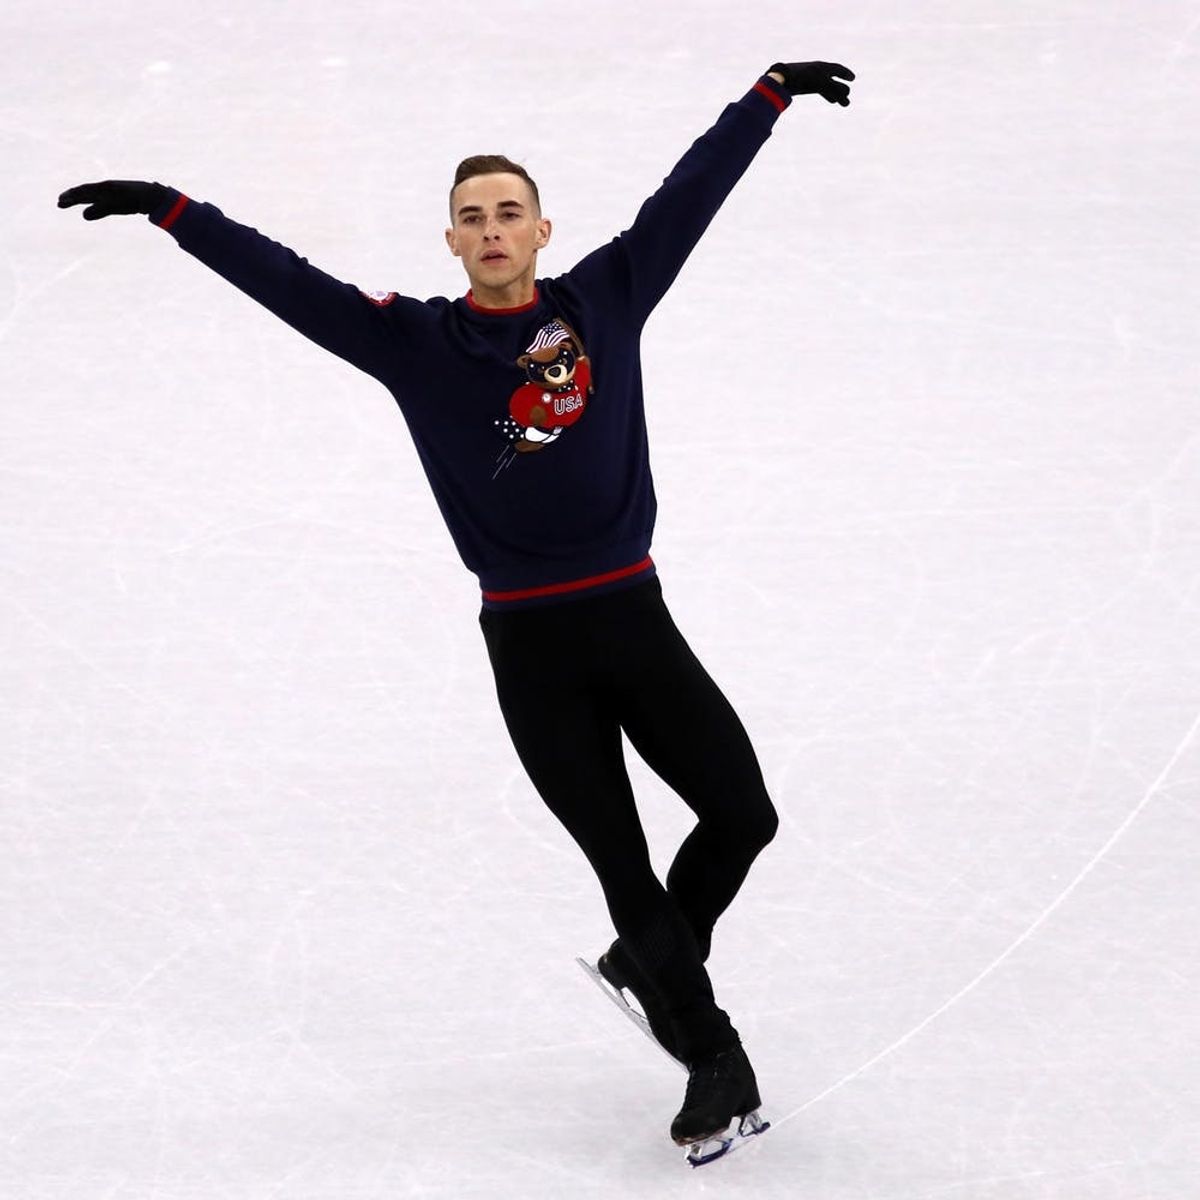 US Olympic Athletes Adam Rippon and Gus Kenworthy Are Calling Out Mike Pence